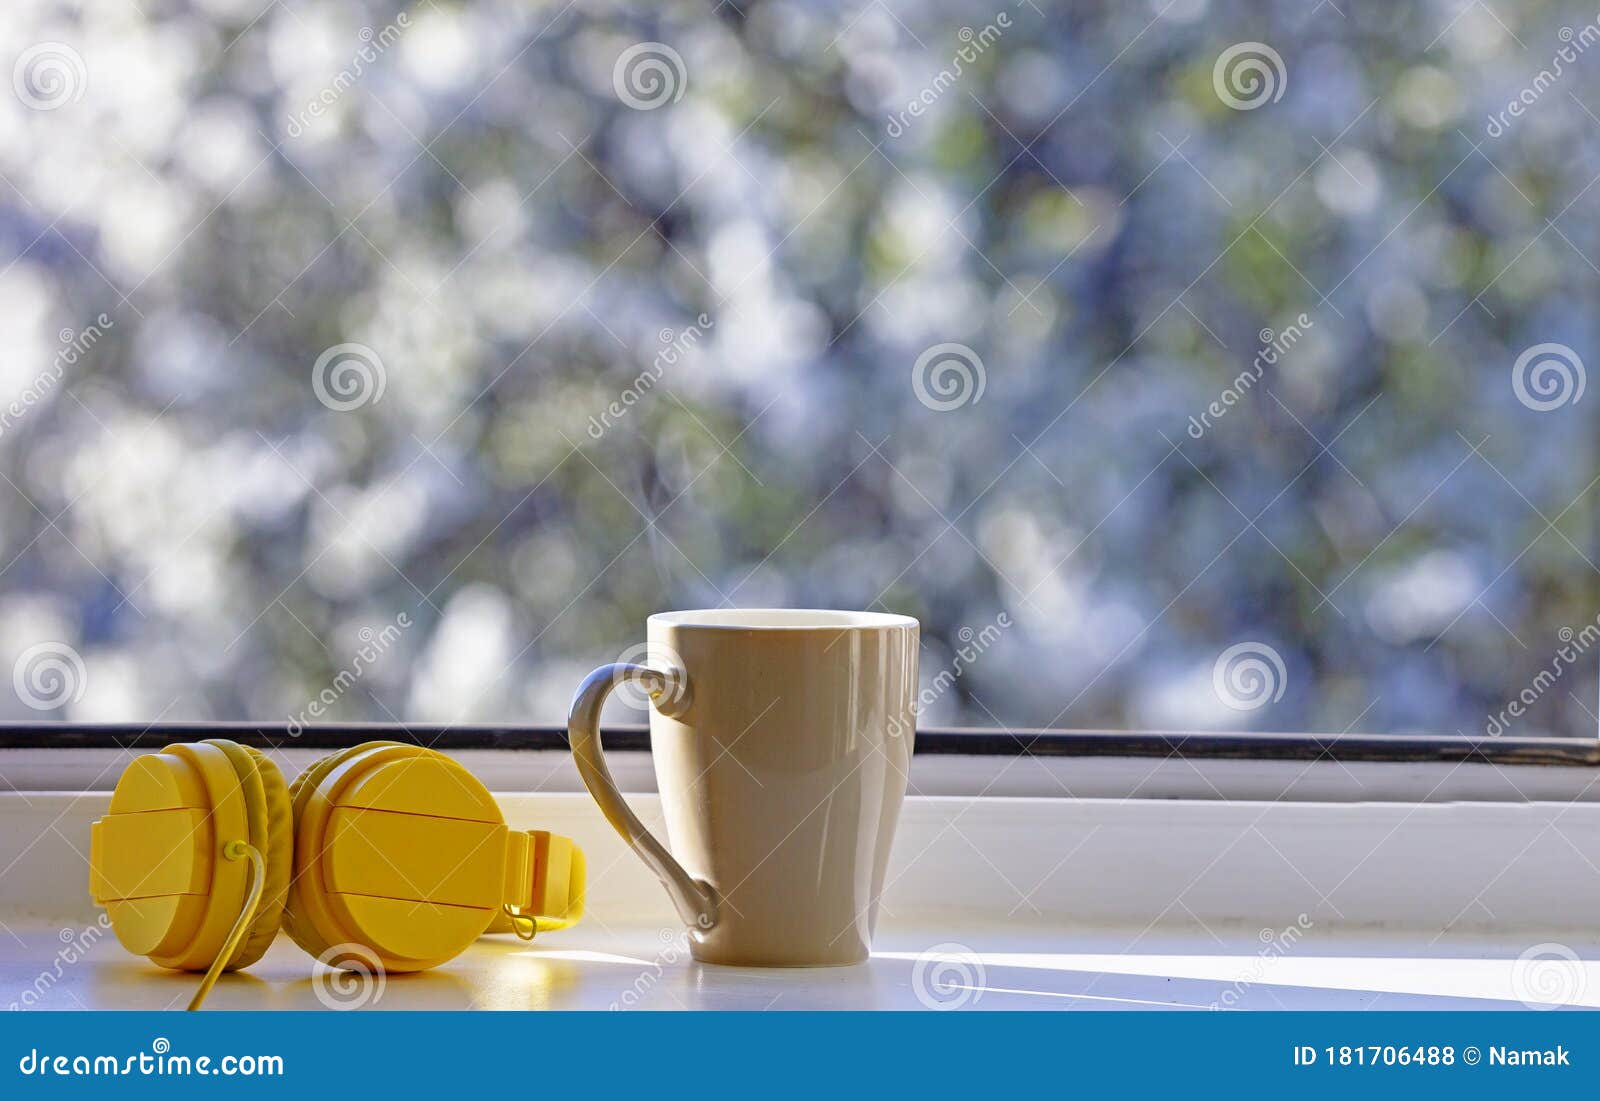 Cup Of Hot Tea With Headphones On A Window Sill Near An Open Window In ... Open Window At Morning